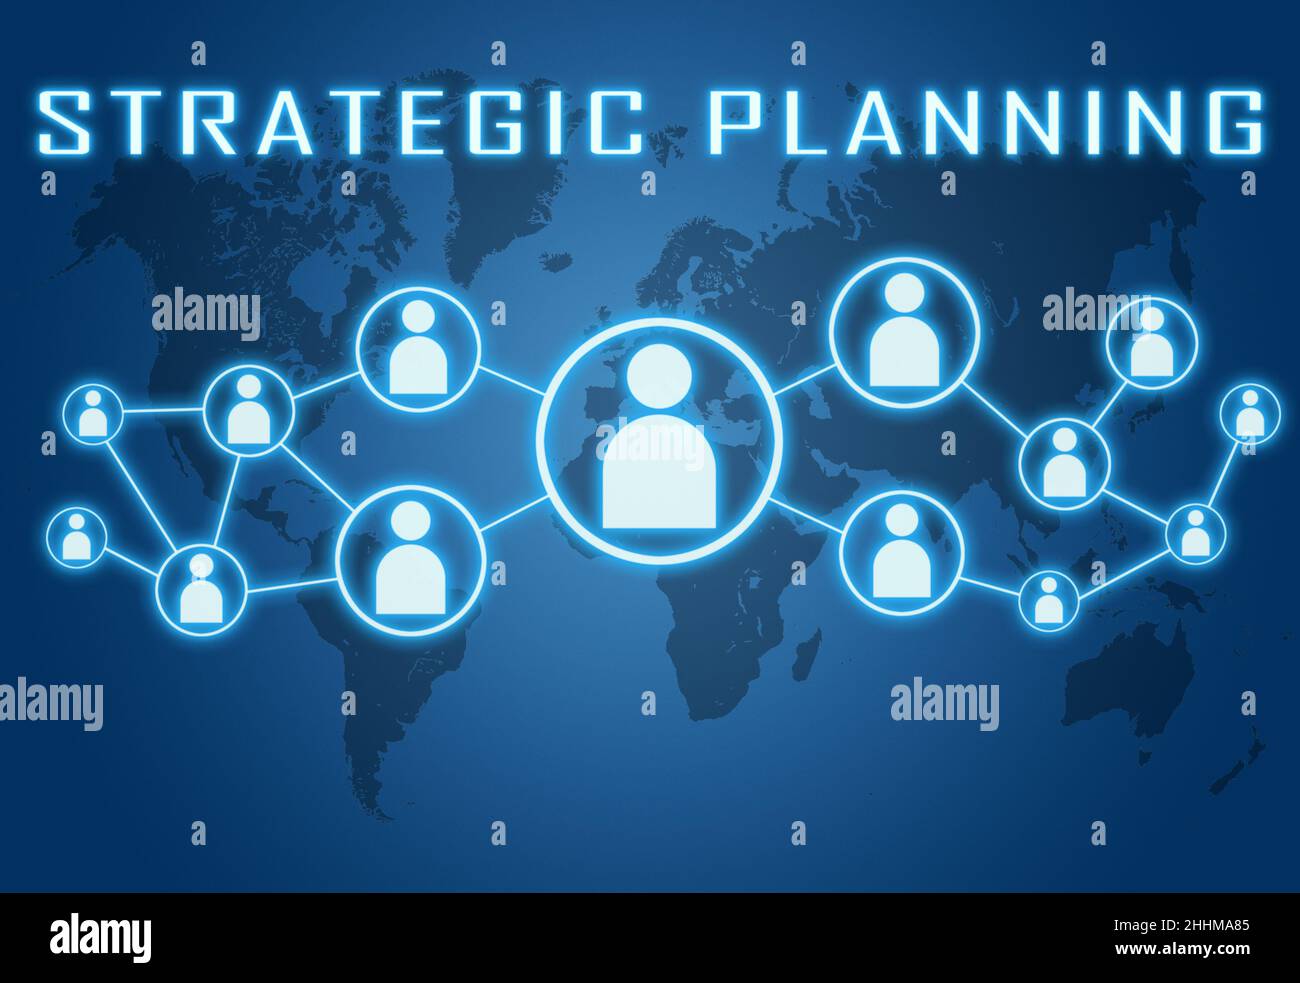 Strategic Planning - text concept on blue background with world map and social icons. Stock Photo